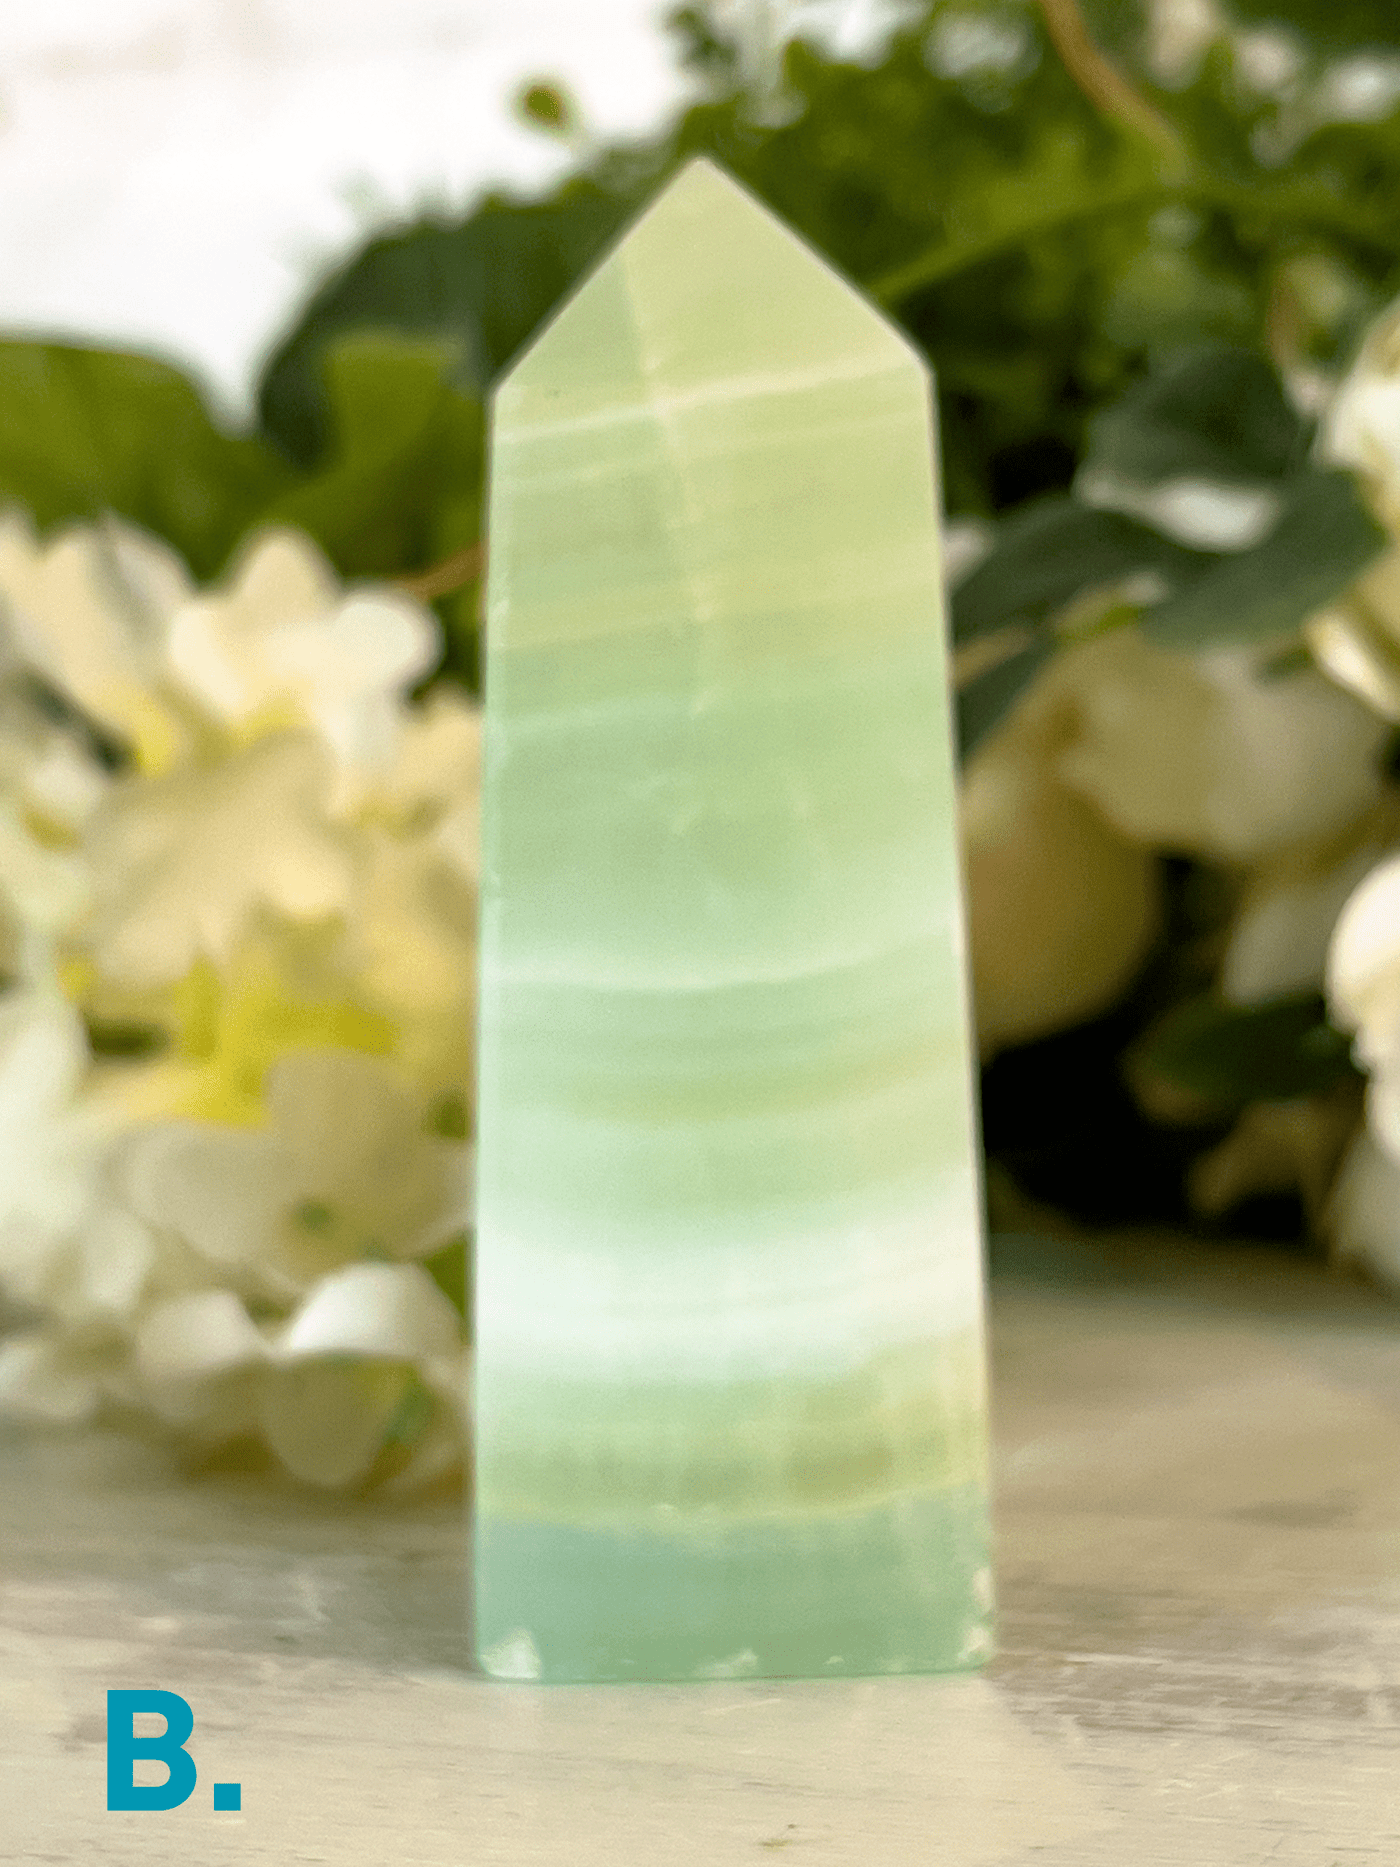 PISTACHIO CALCITE POINTS Revive In Style Vintage Furniture Painted Refinished Redesign Beautiful One of a Kind Artistic Antique Unique Home Decor Interior Design French Country Shabby Chic Cottage Farmhouse Grandmillenial Coastal Chalk Paint Metallic Glam Eclectic Quality Dovetailed Rustic Furniture Painter Pinterest Bedroom Living Room Entryway Kitchen Home Trends House Styles Decorating ideas